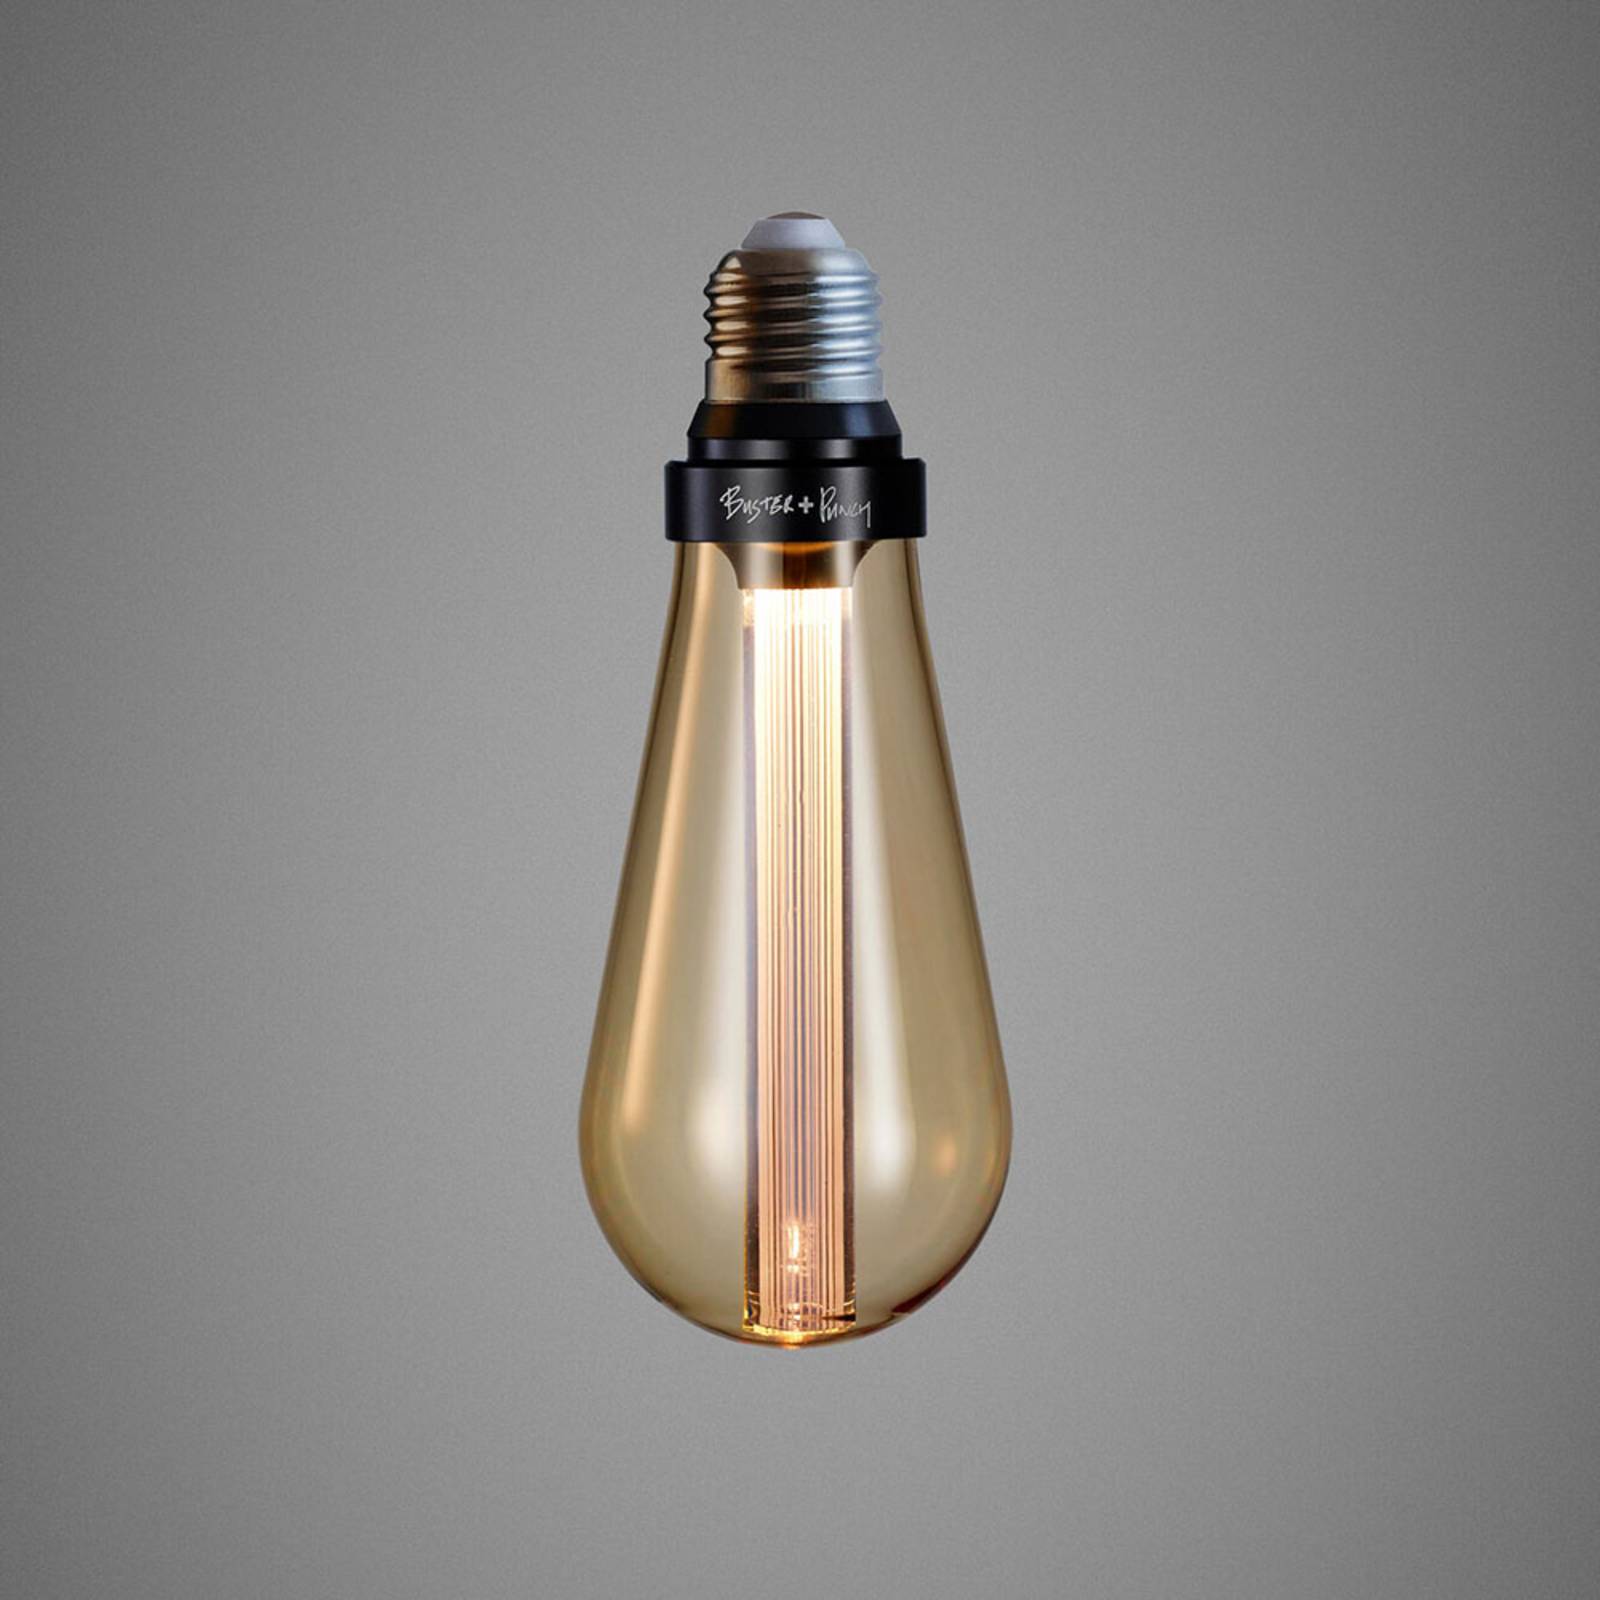 Buster + Punch LED-Lampe E27 2W dimmbar gold von Buster + Punch